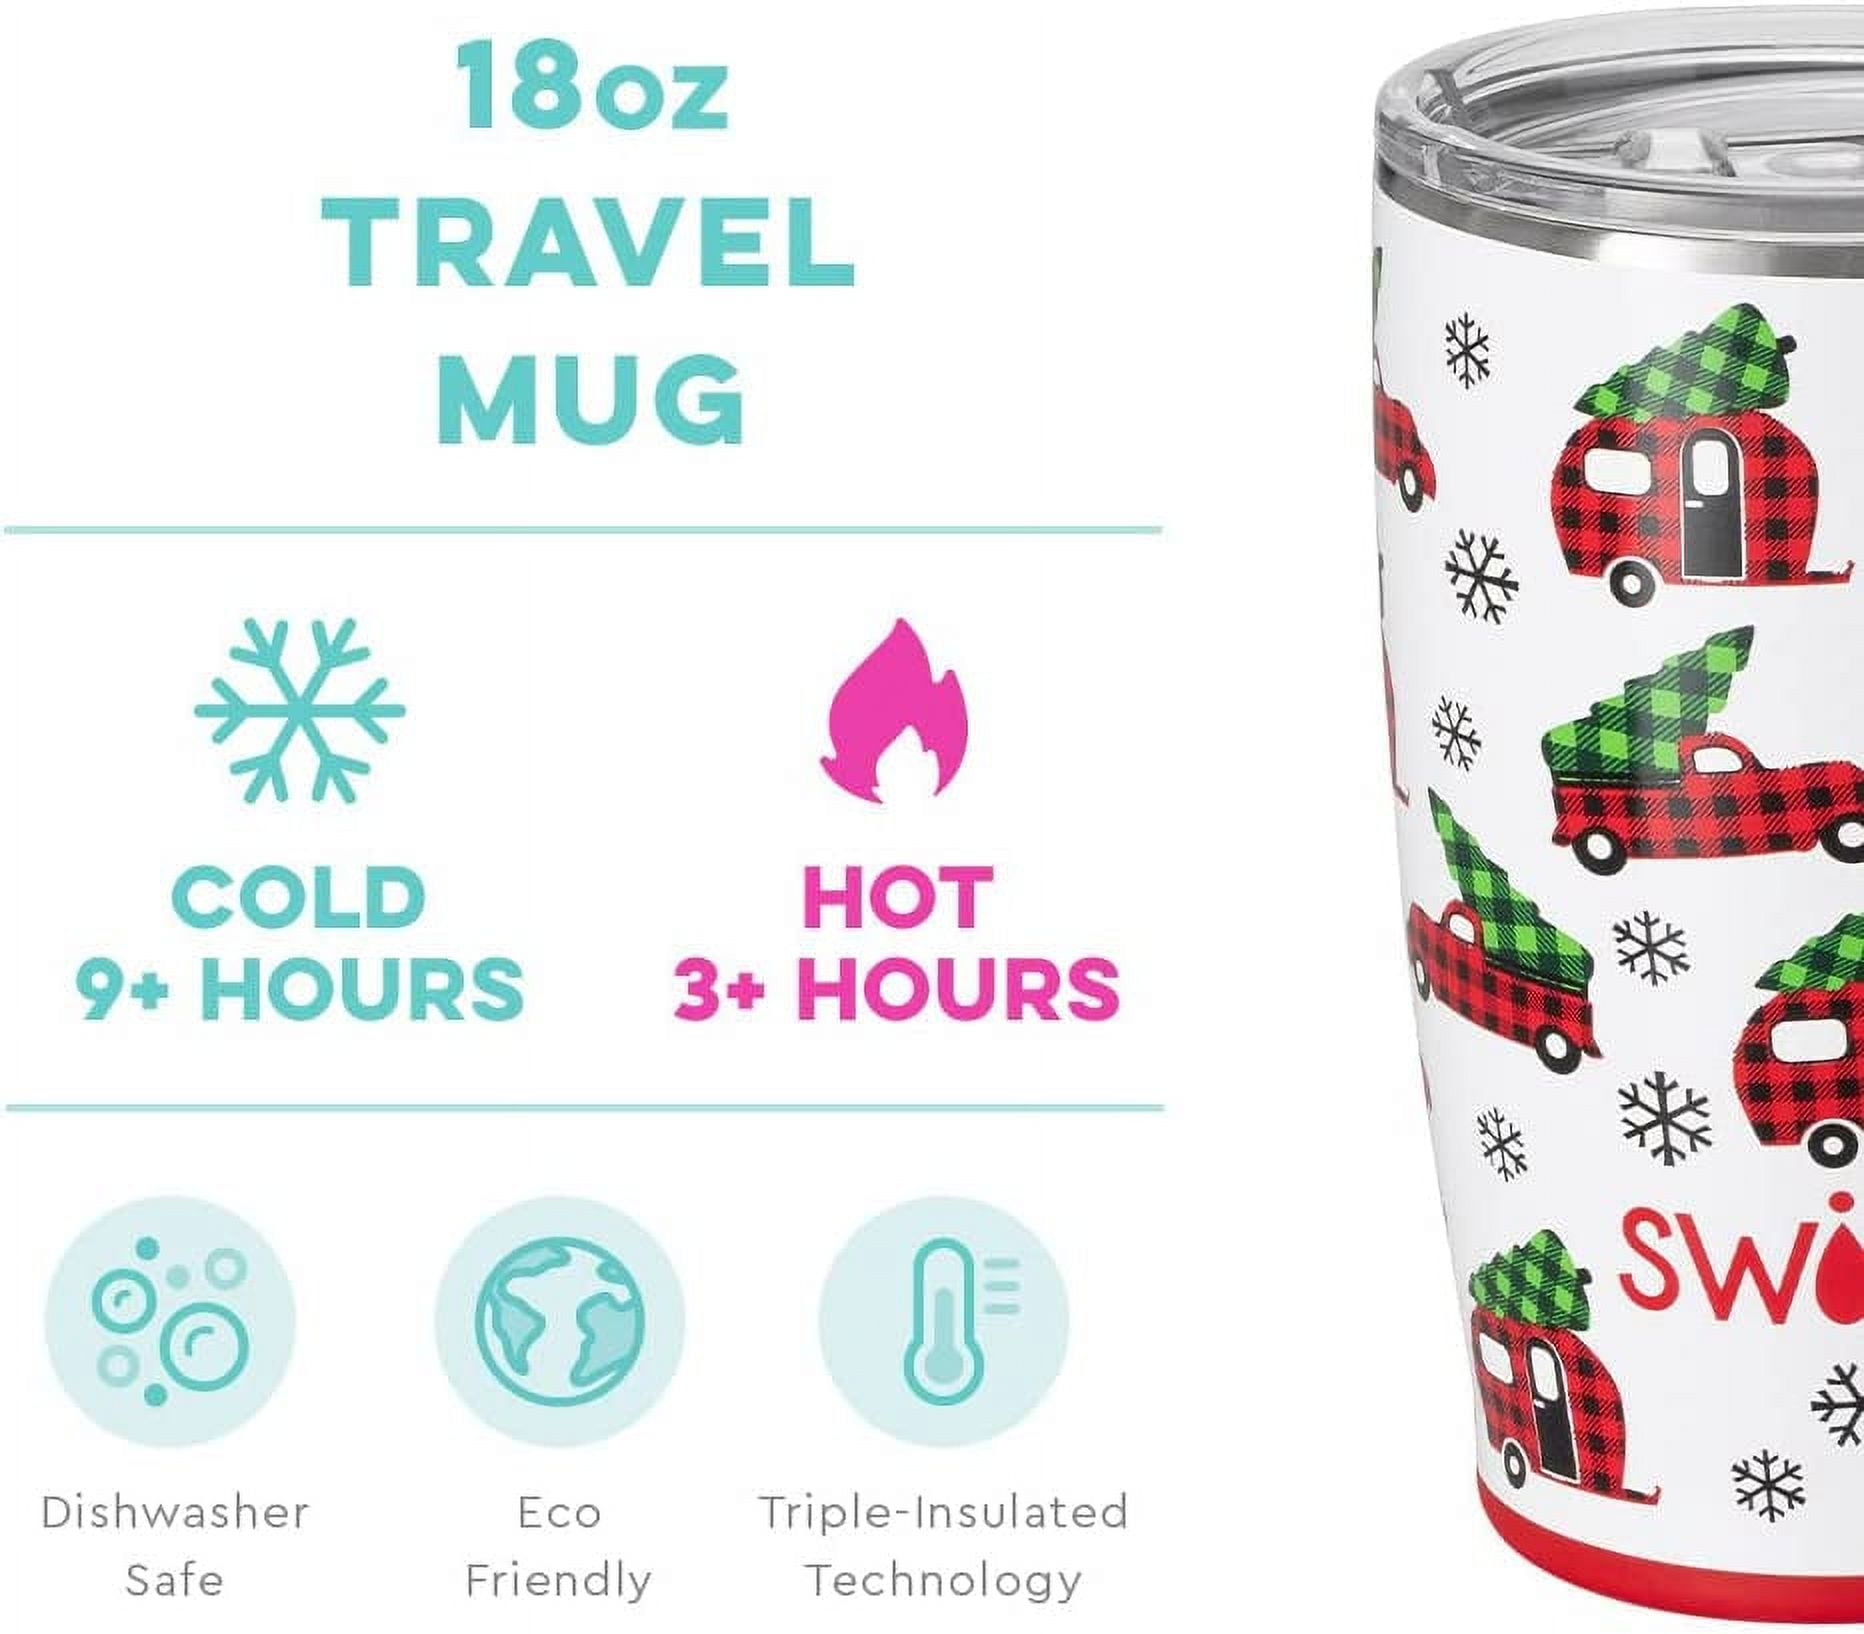 Swig Life 18oz Travel Mug | Insulated Tumbler with Handle and Lid, Cup  Holder Friendly, Dishwasher S…See more Swig Life 18oz Travel Mug |  Insulated